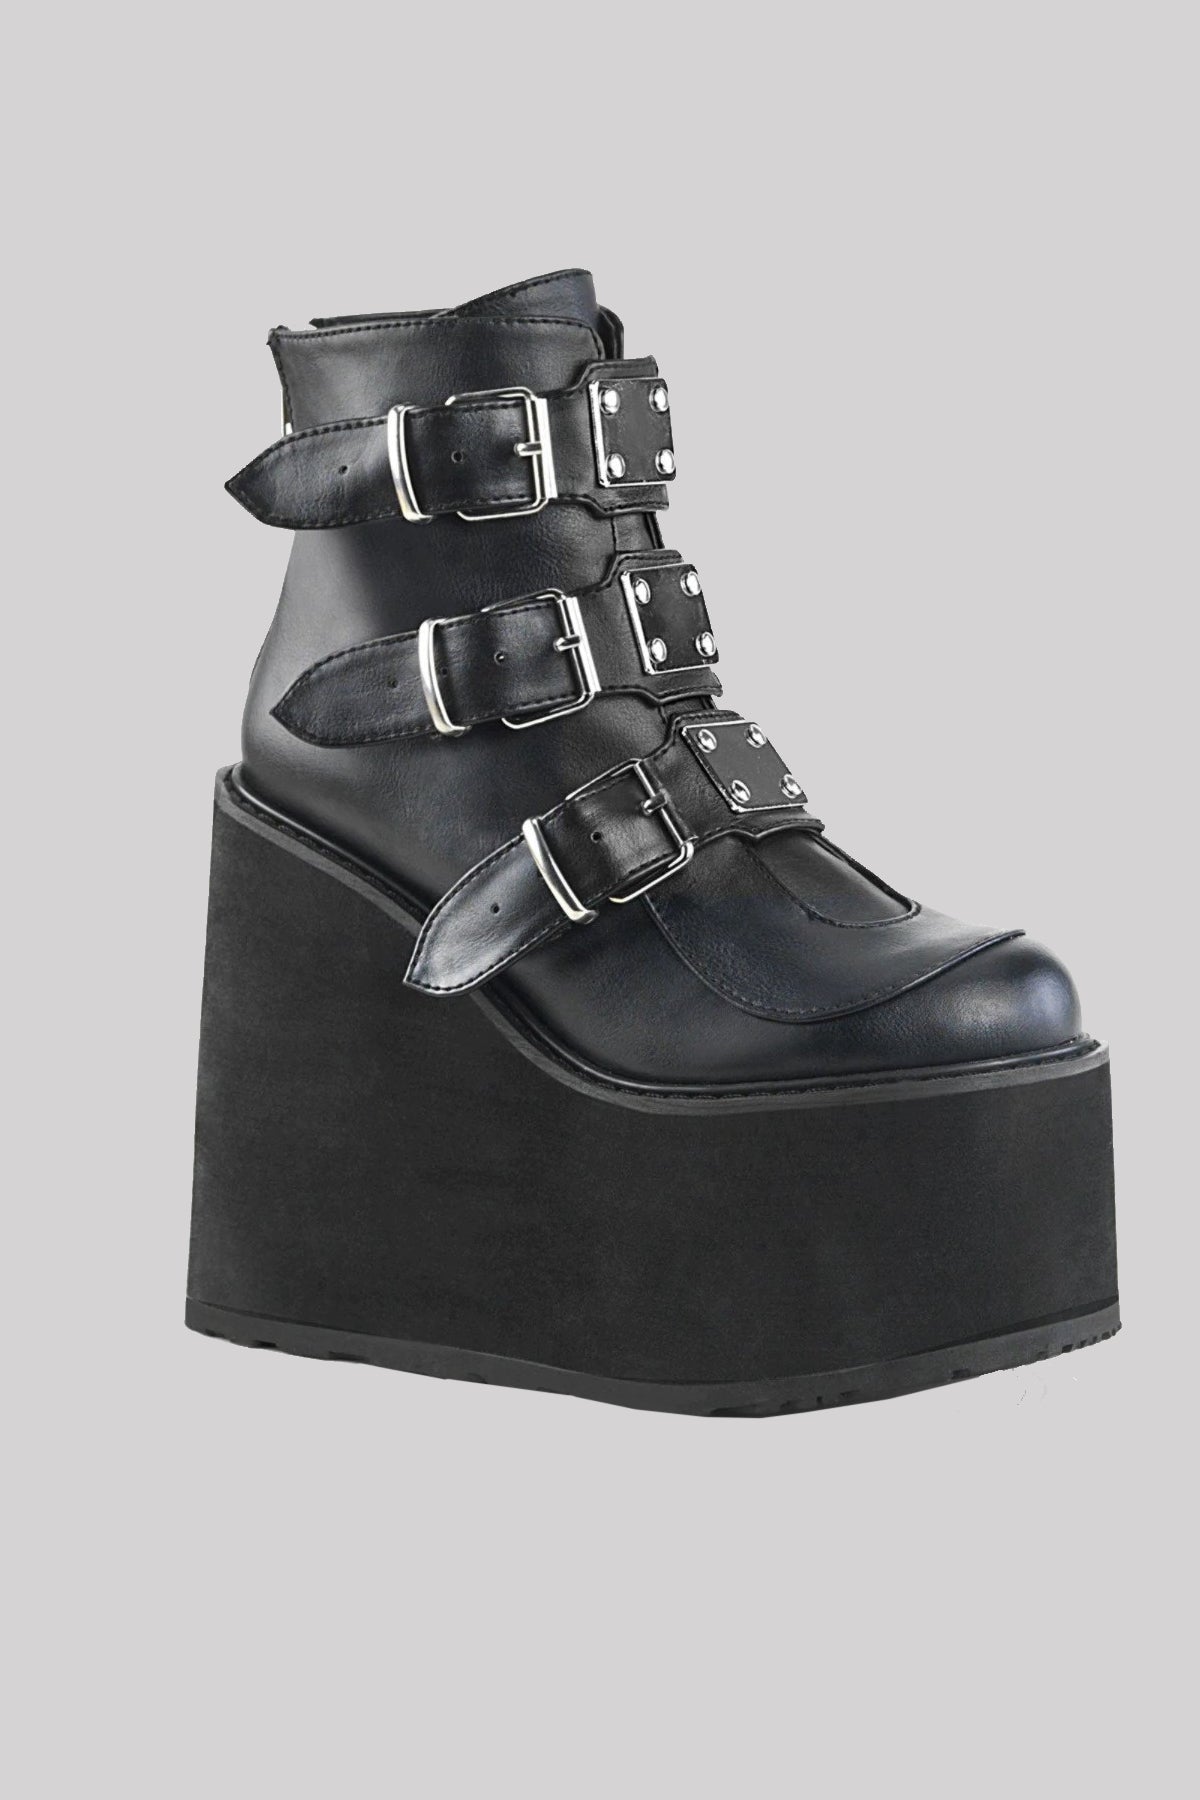 Demonia Swing 105 Tiered Platform Metal Plate Ankle Boots